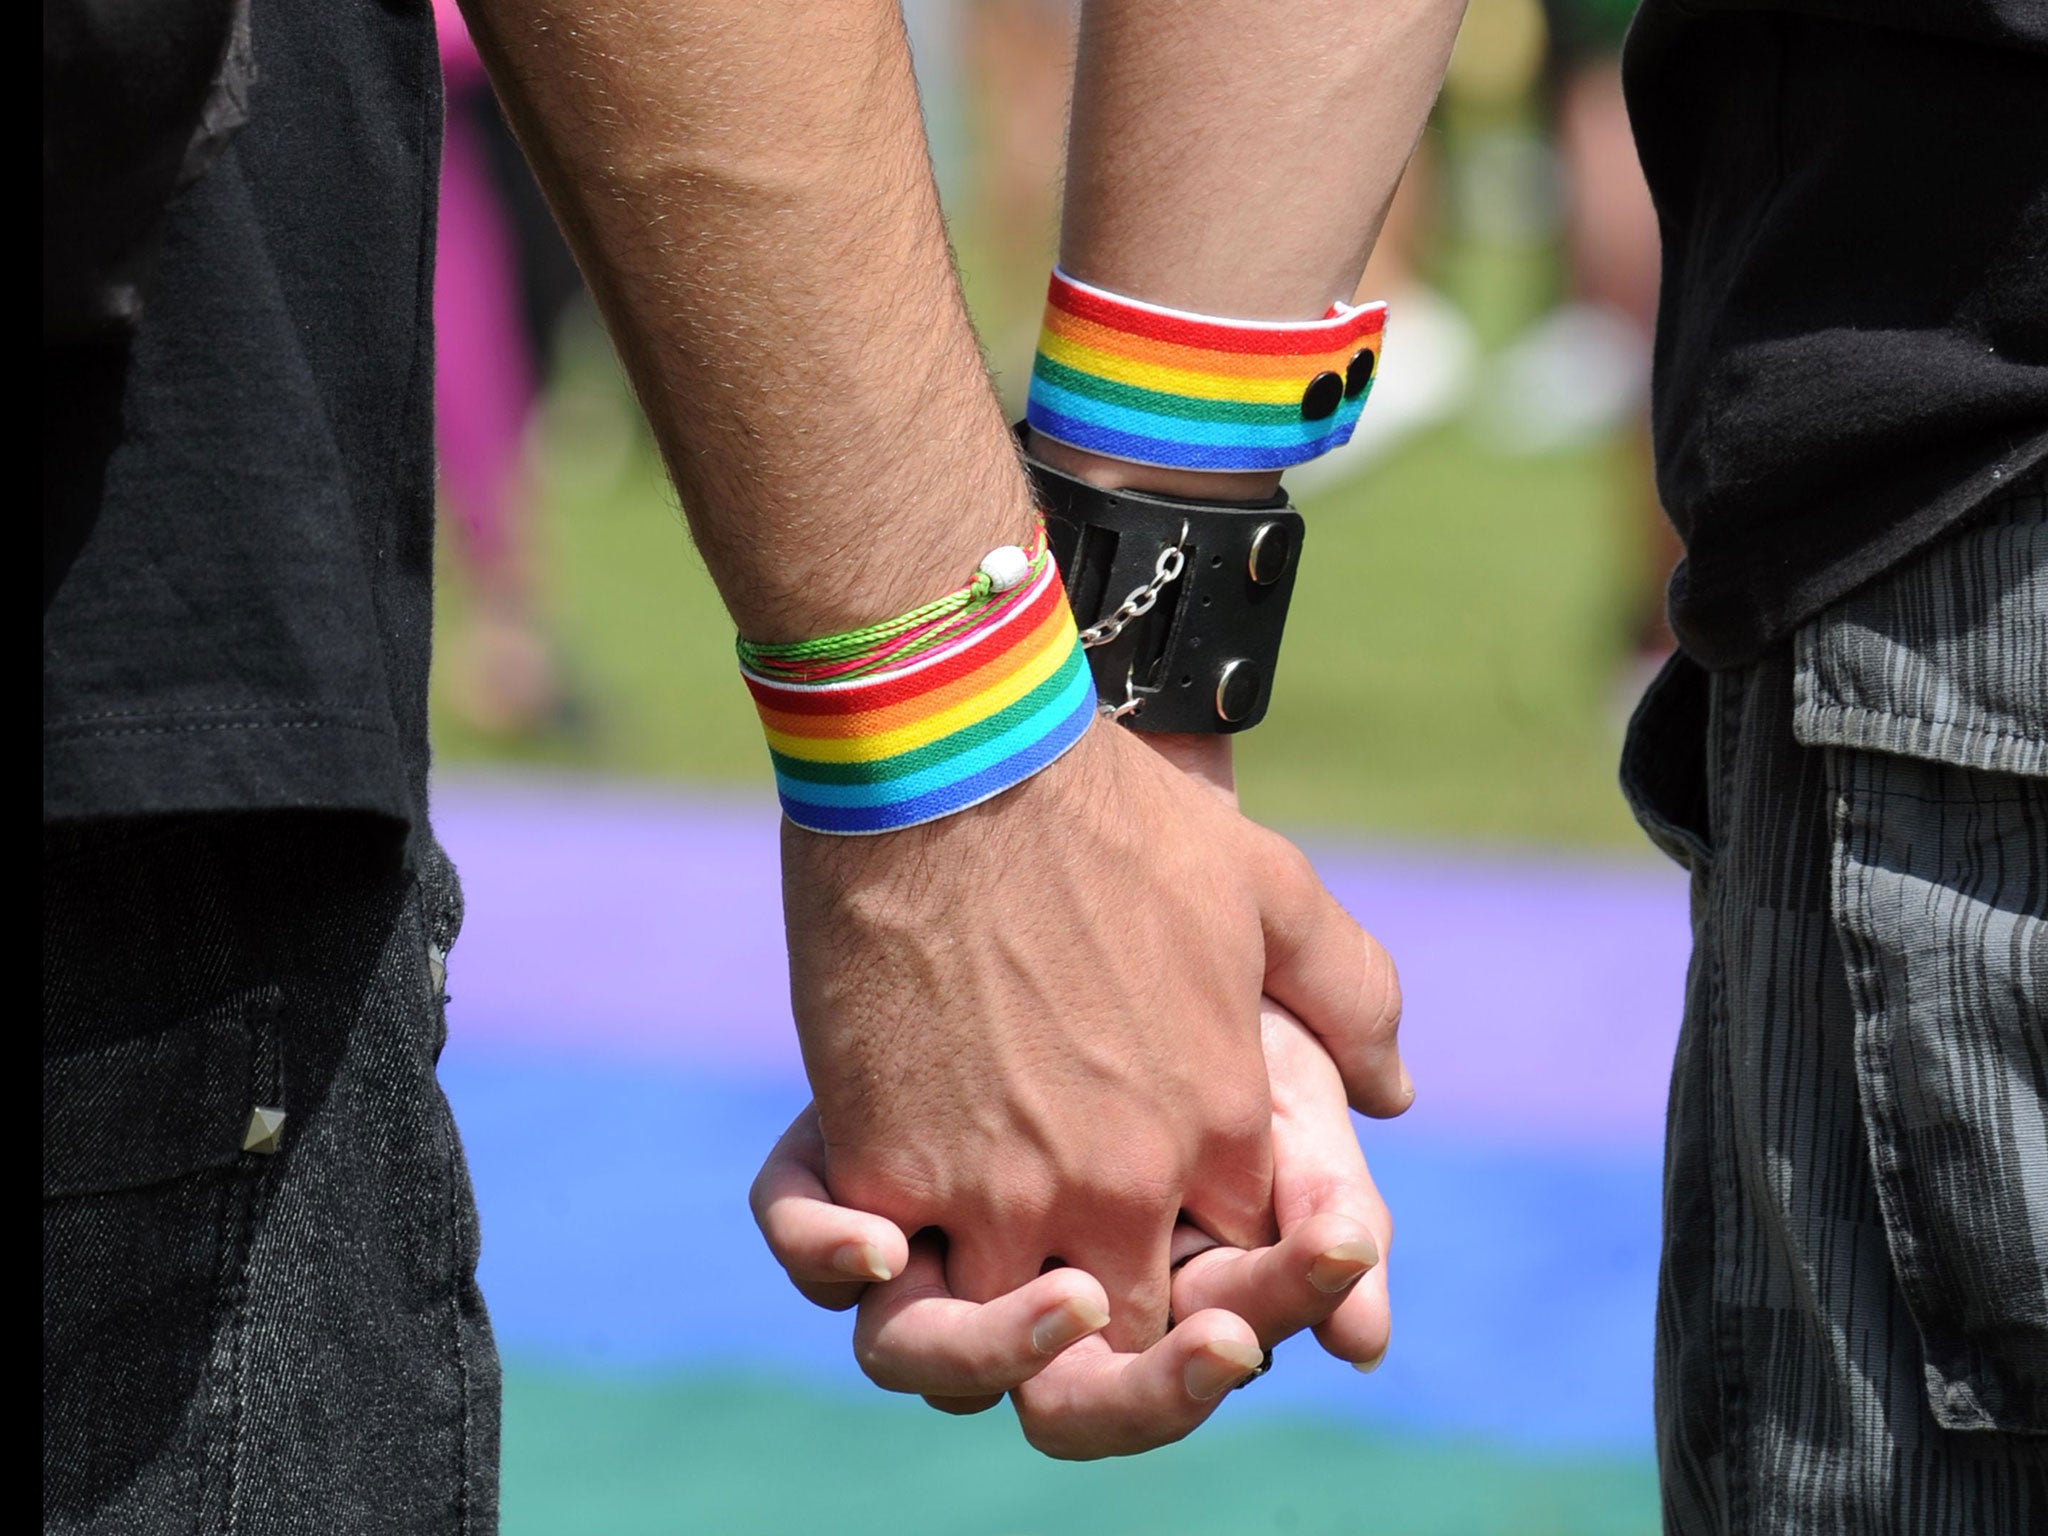 The passing of the bill has been called a 'milestone' for gay couples in Australia